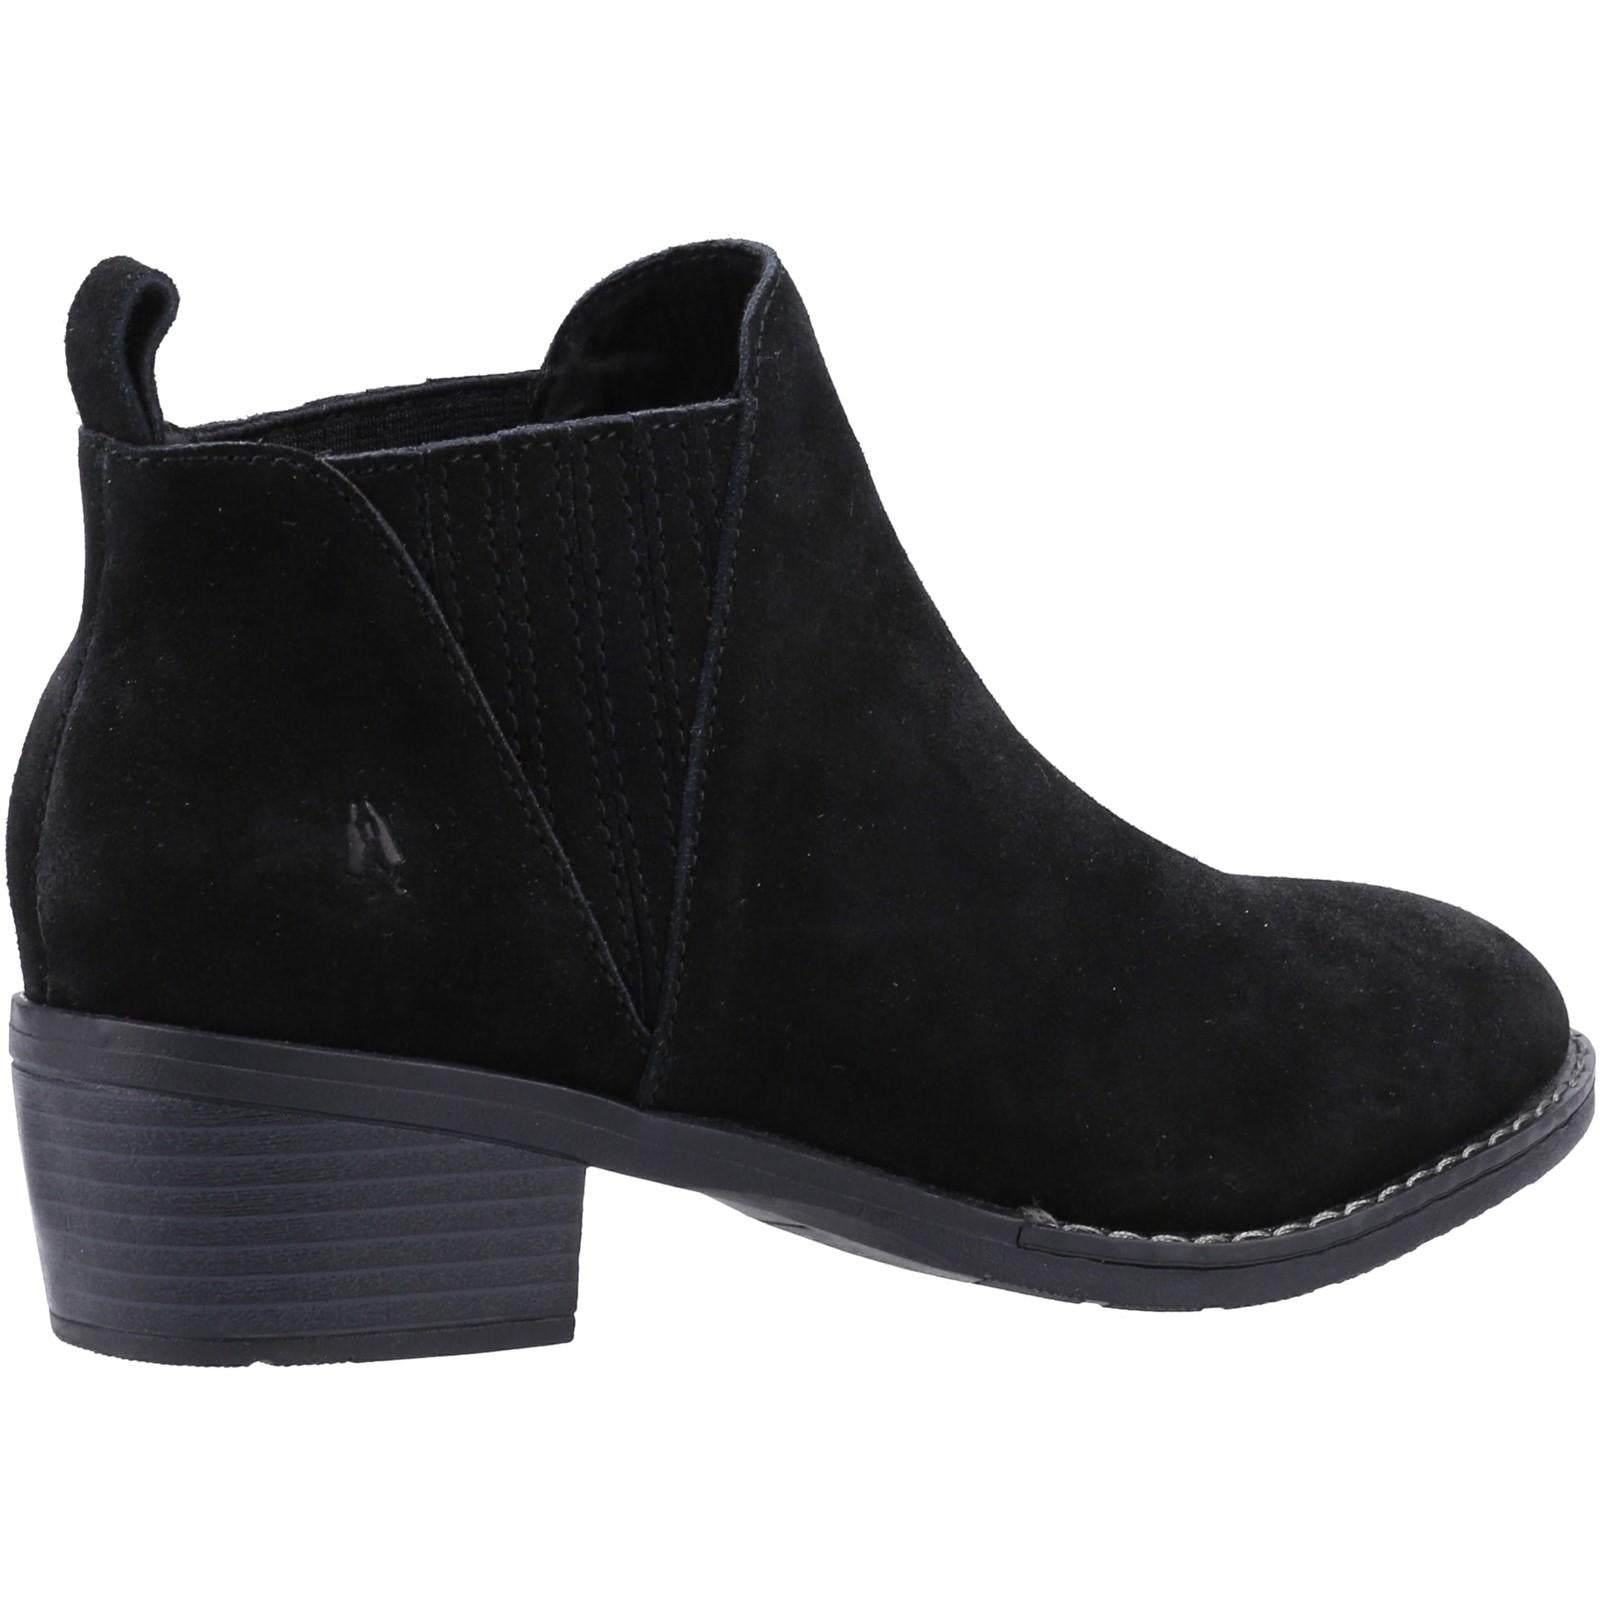 Hush Puppies Isobel Ankle Boot